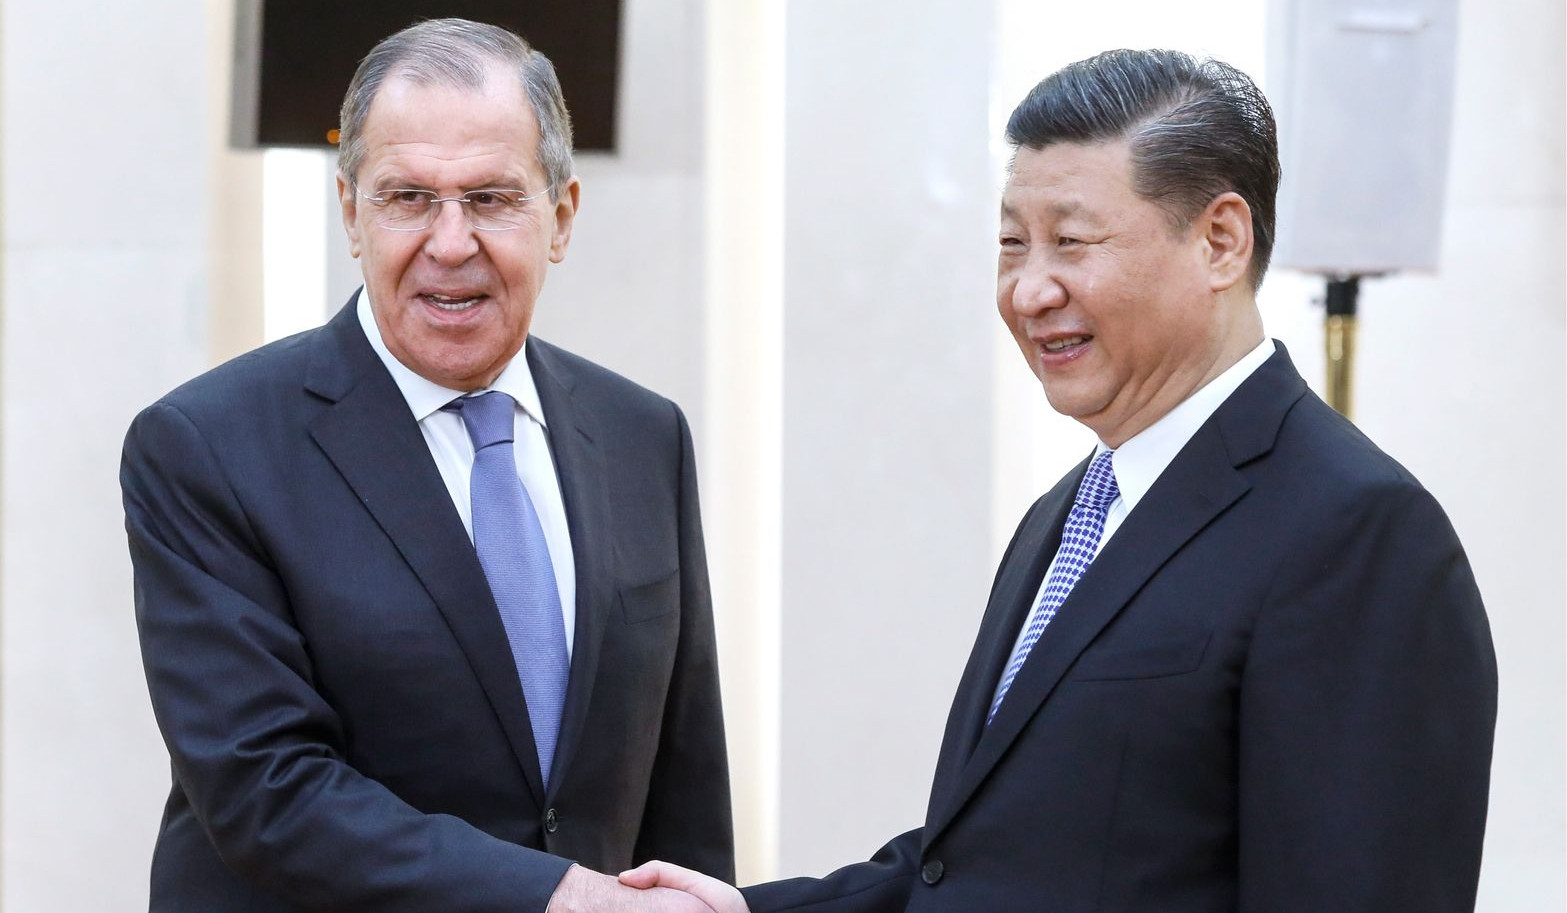 Russia, China to start dialogue on Eurasian security, Russia's Lavrov says